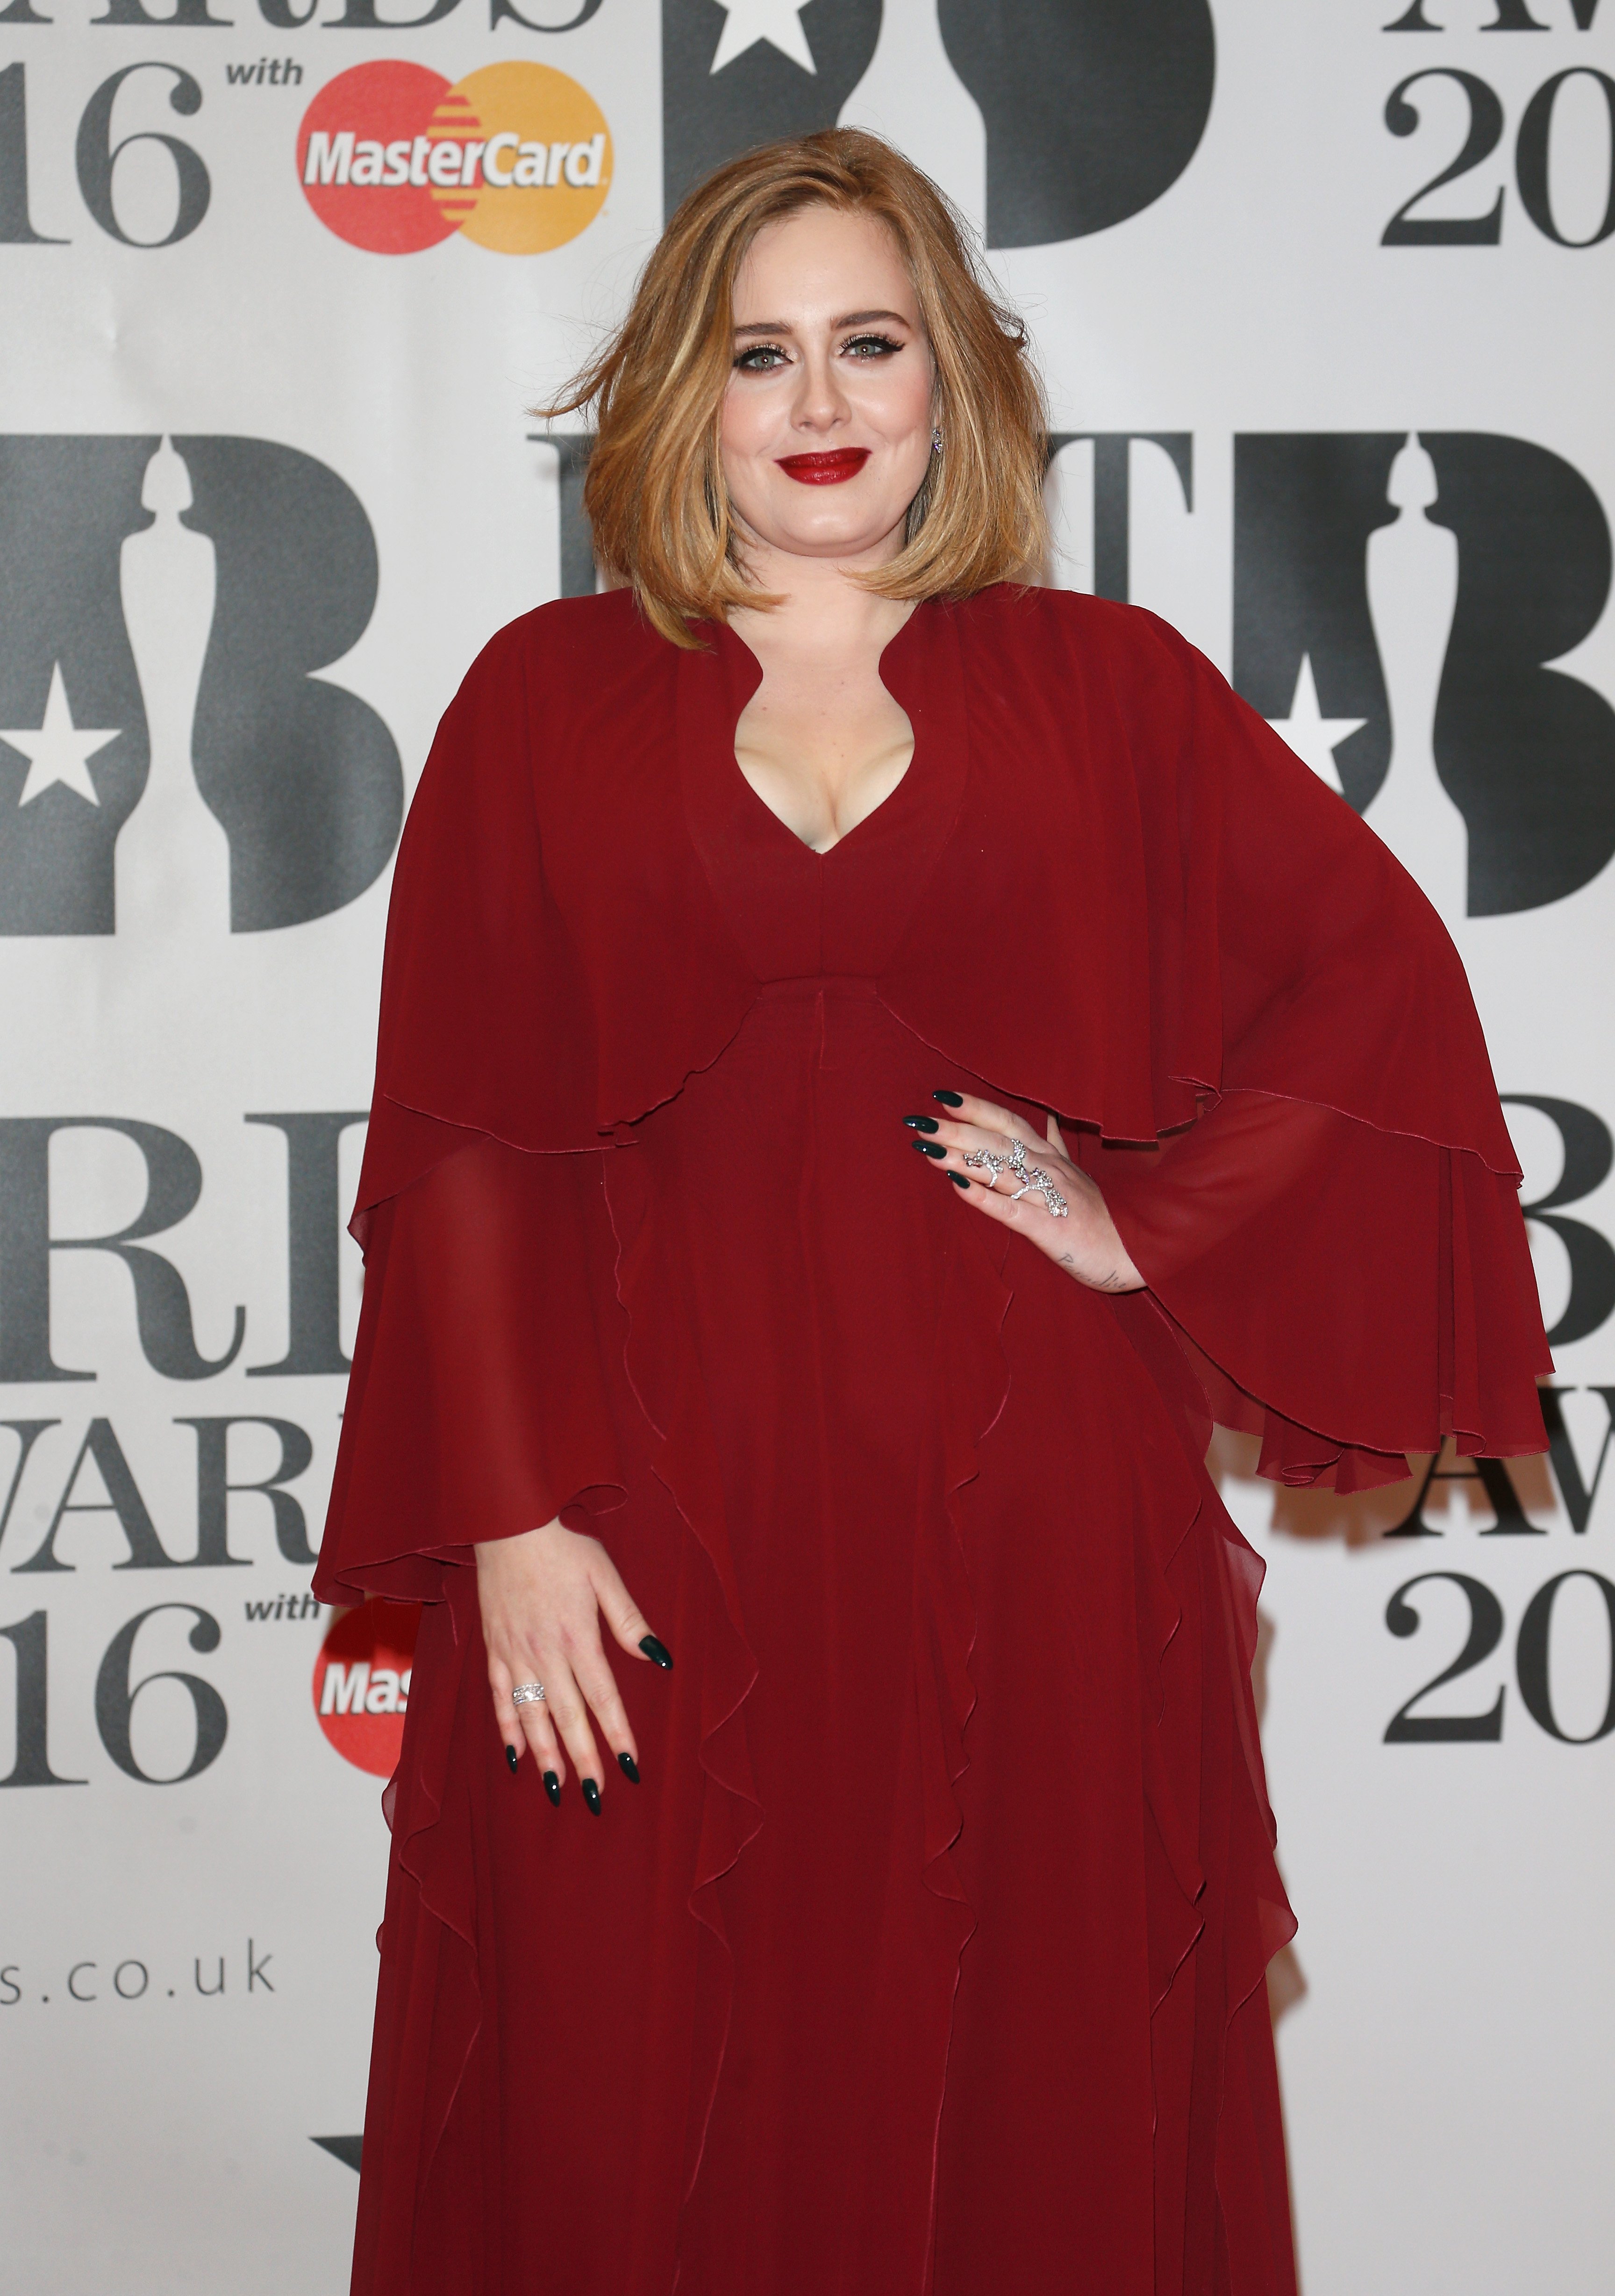 Adele at the red carpet of the BRIT Awards 2016 on February 24, 2016 in London, England | Photo: Getty Images